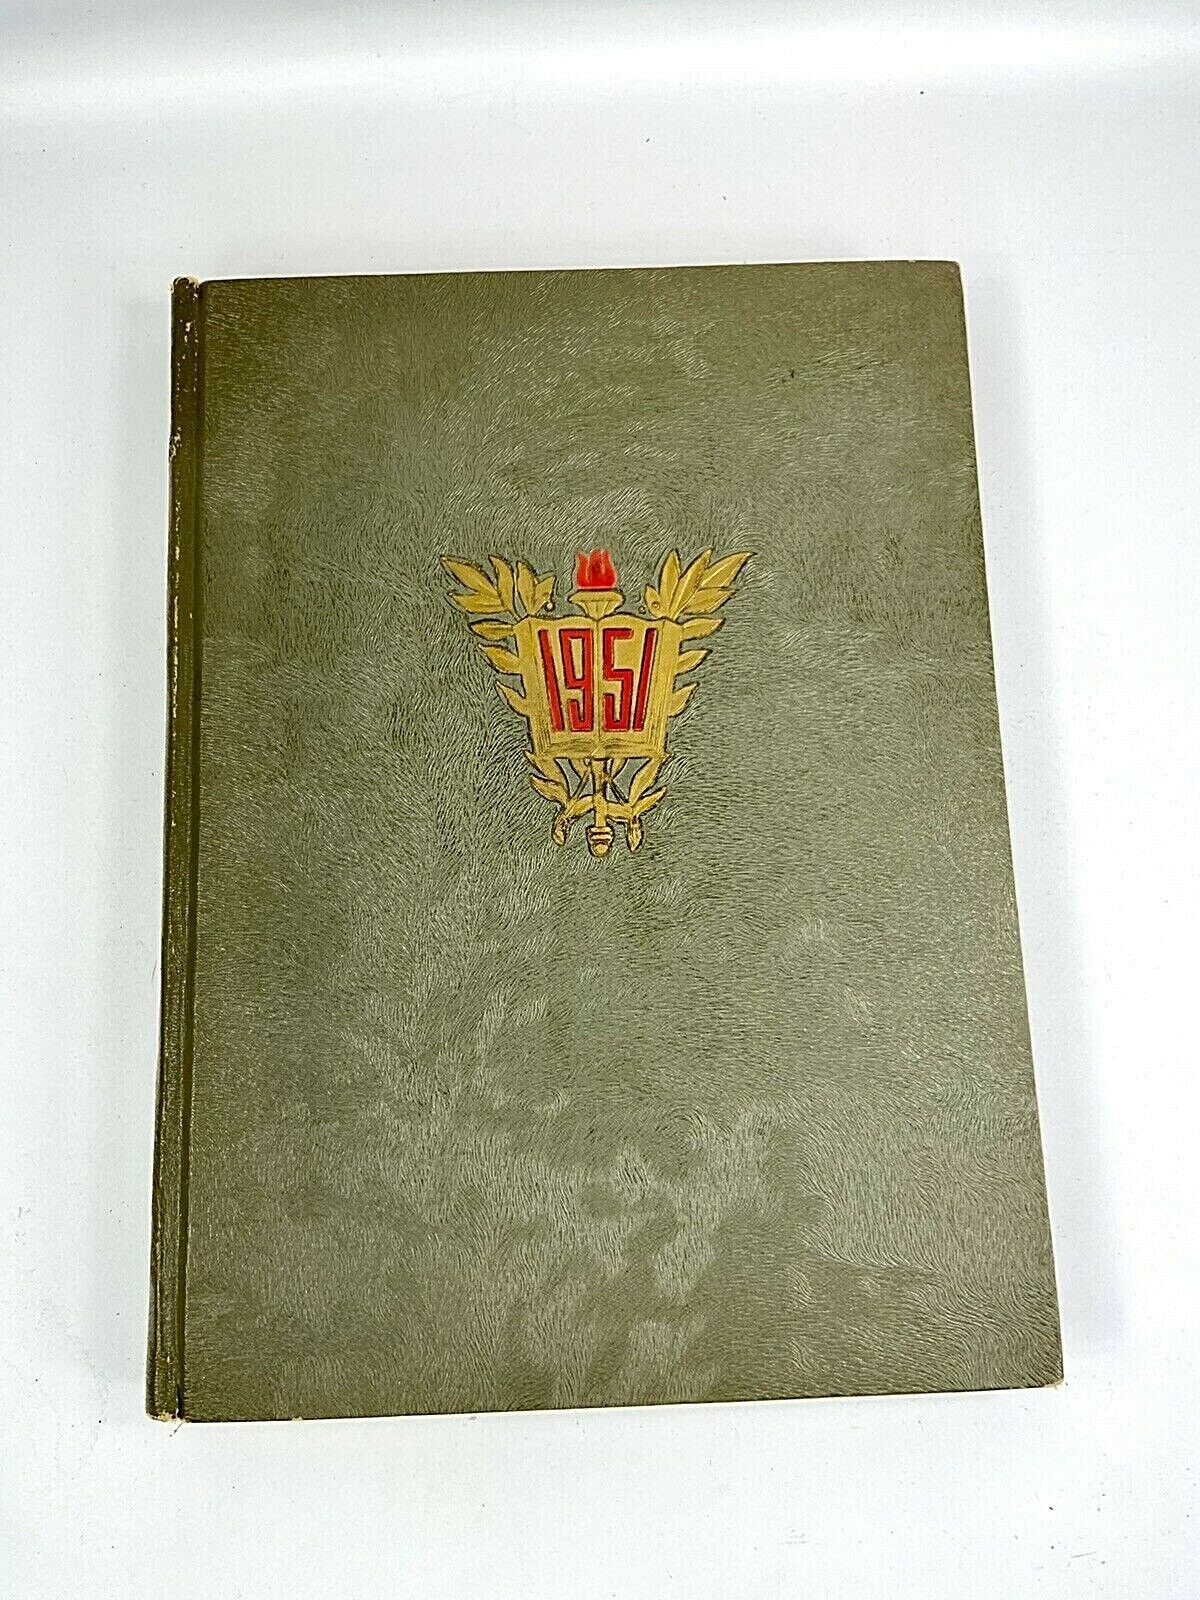 Vintage 1951 College of New Rochelle New York Yearbook